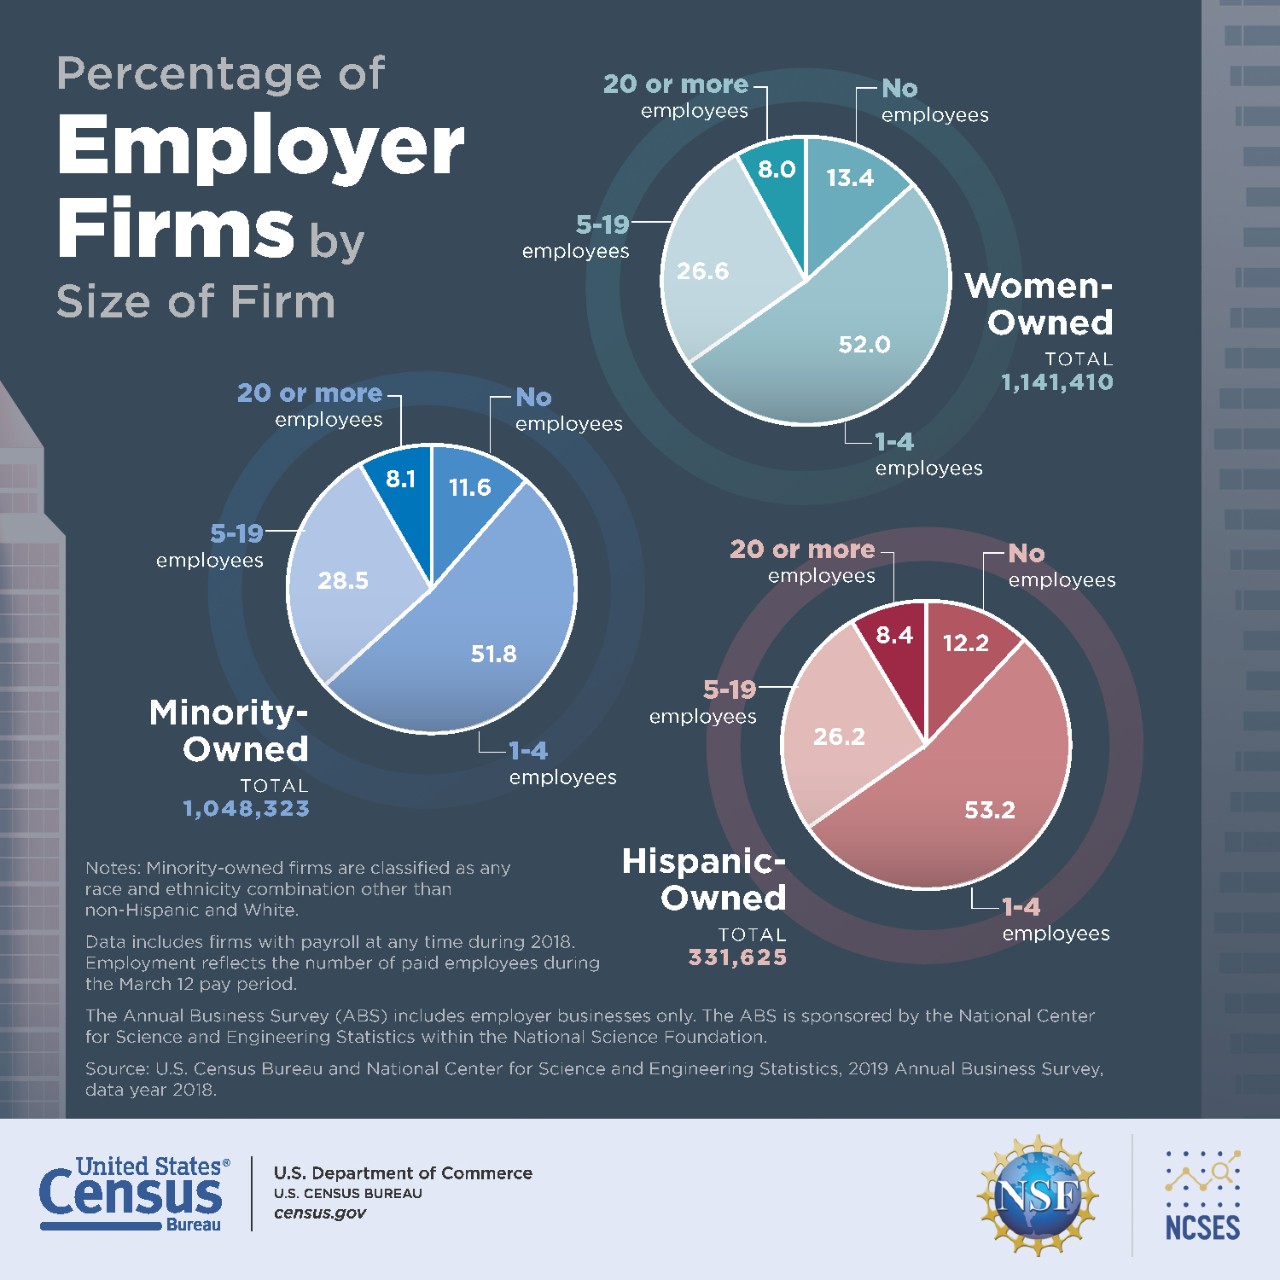 Percentage of Employer Firms by Size of Firm